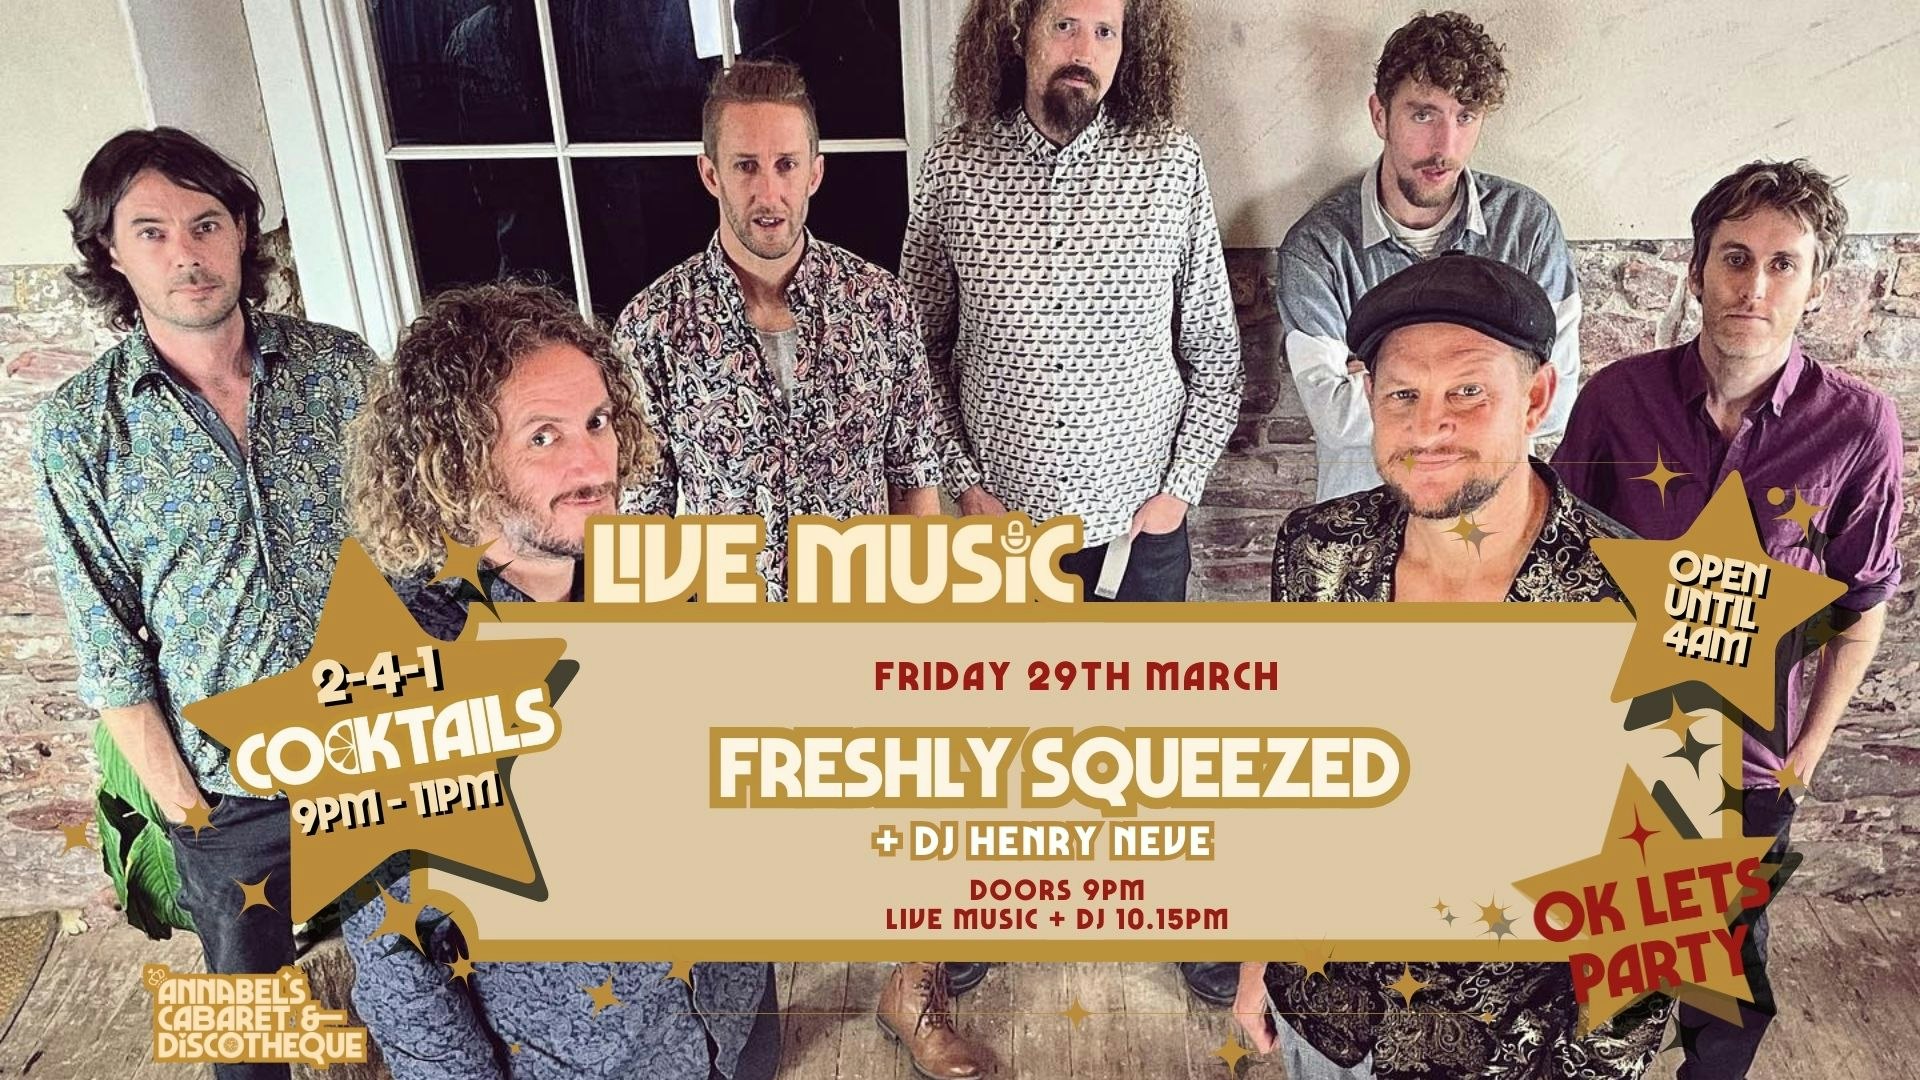 Live Music: FRESHLY SQUEEZED // Annabel’s Cabaret & Discotheque